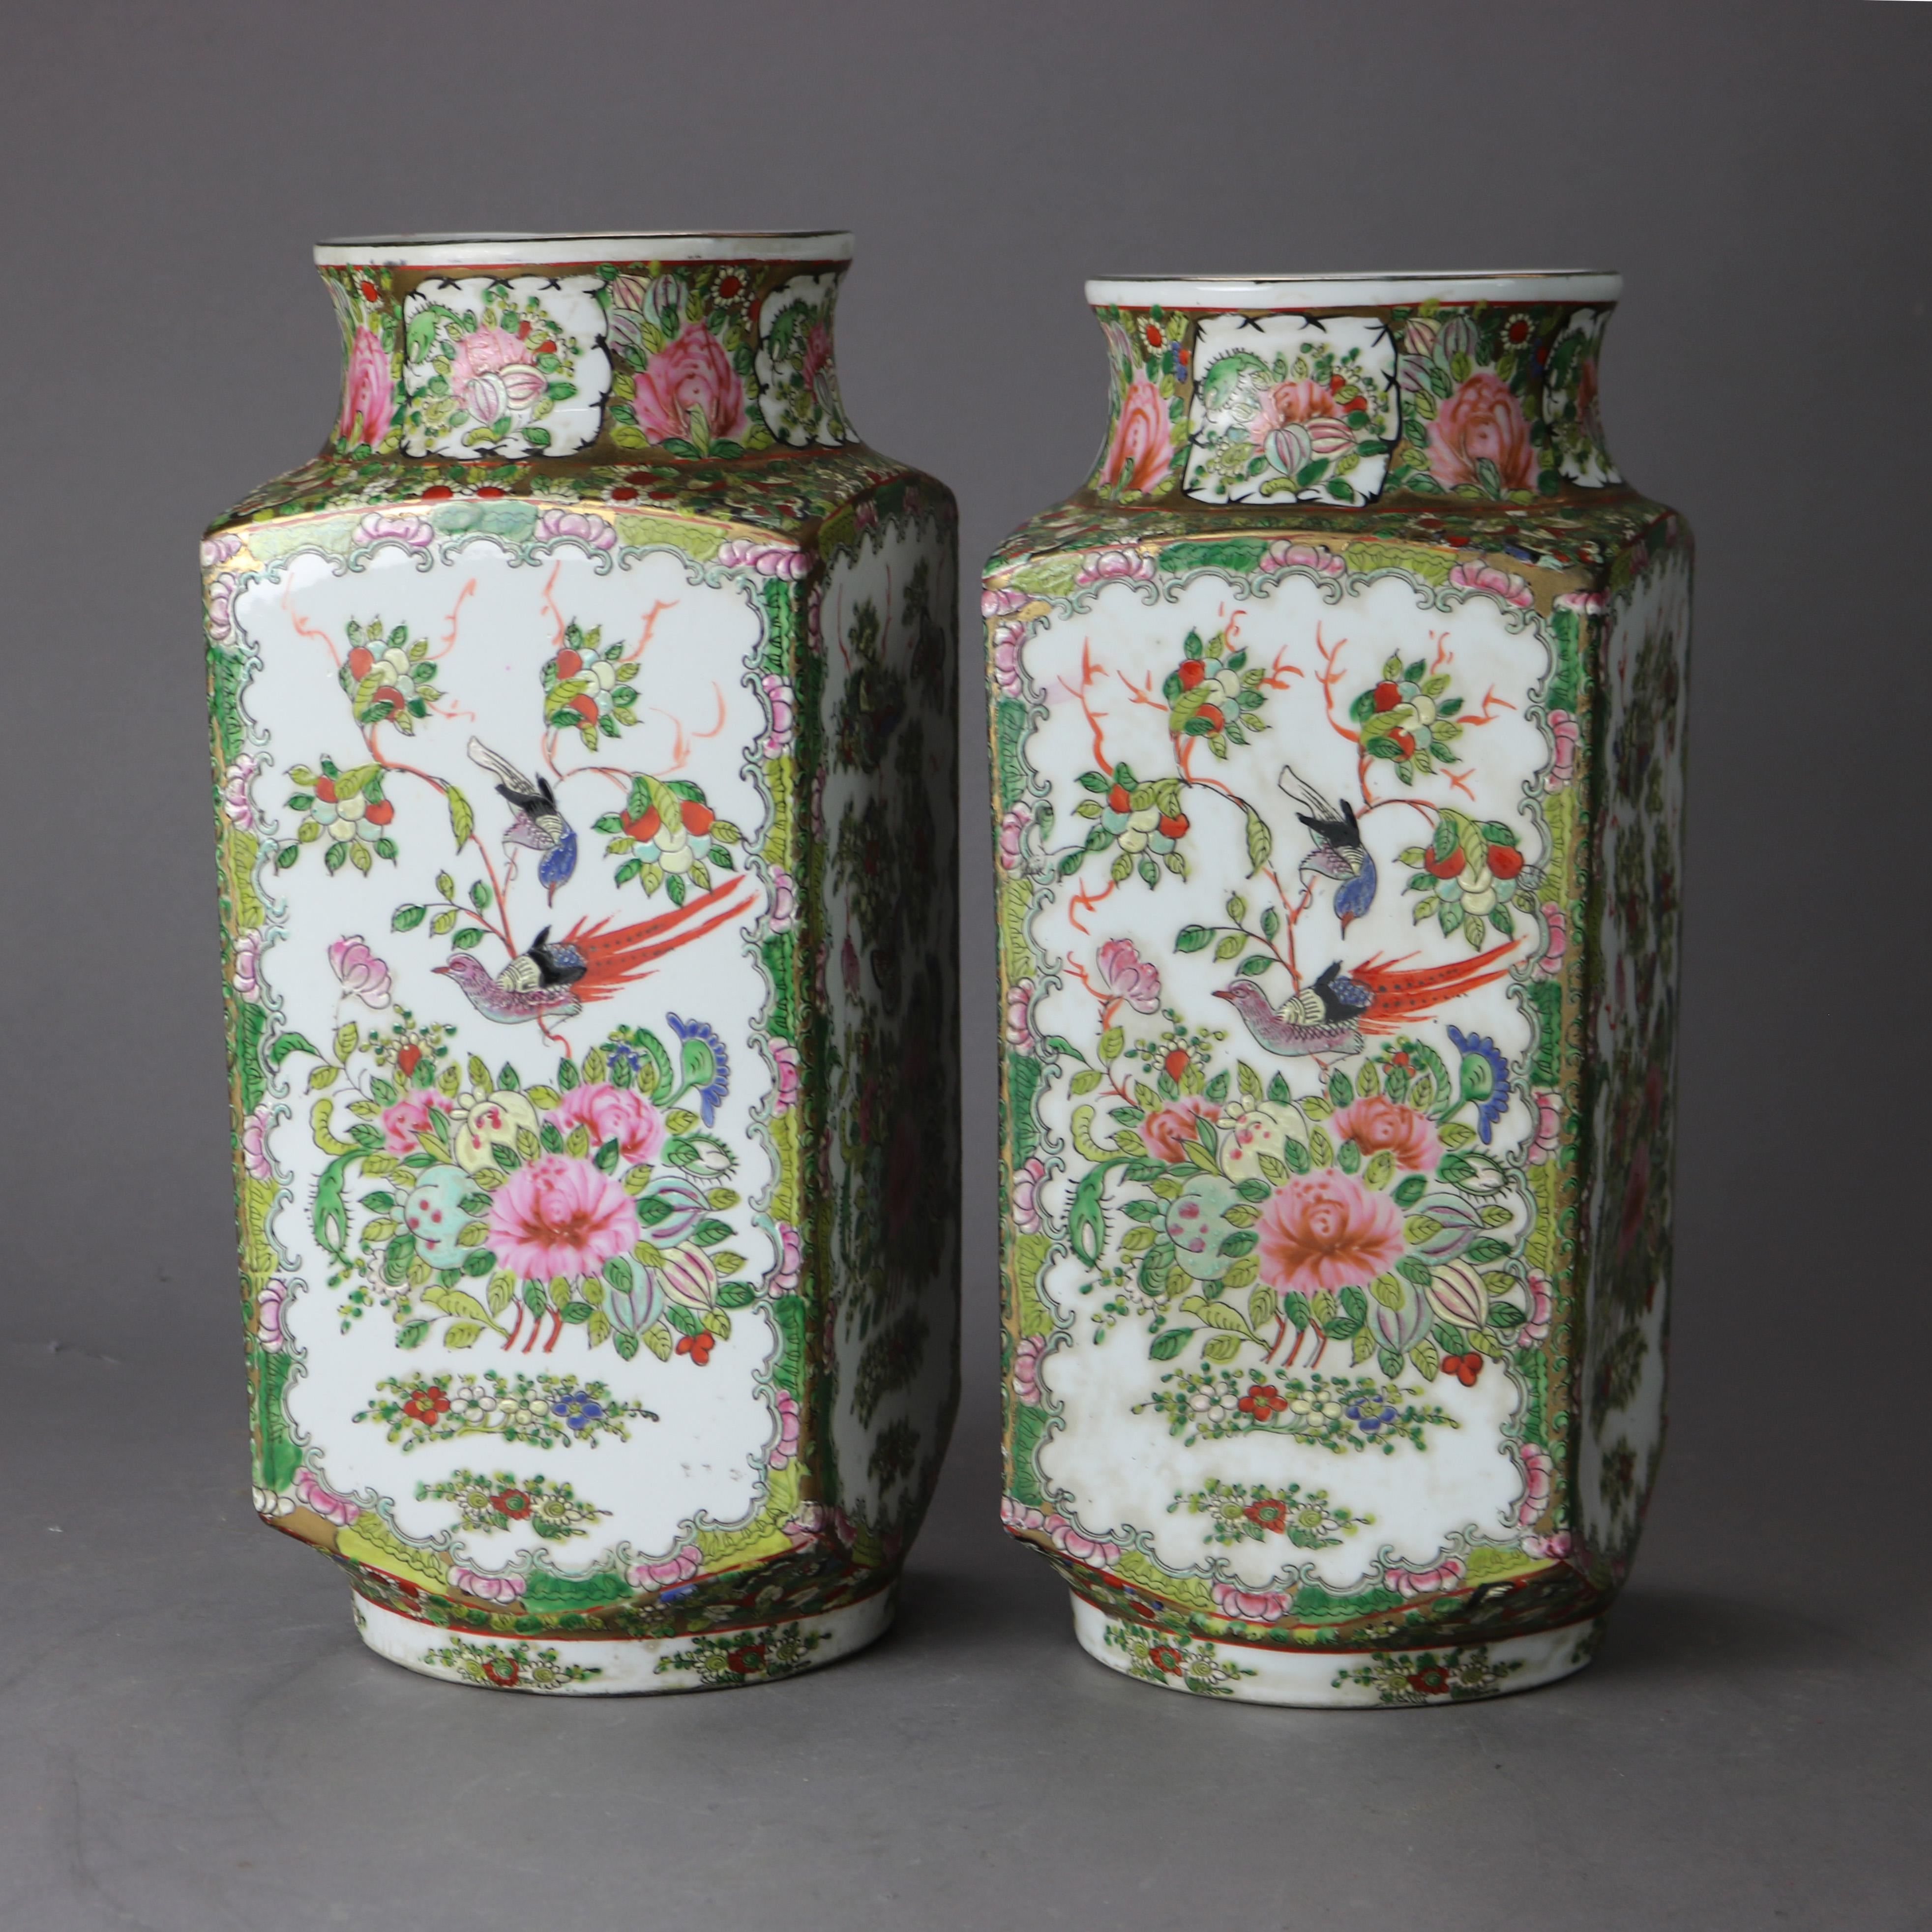 A pair of Chinese vase offer porcelain construction in square form with garden scene having flowers and birds, stamped on base as photographed, 20th century

Measures - 14.75H x 6.5